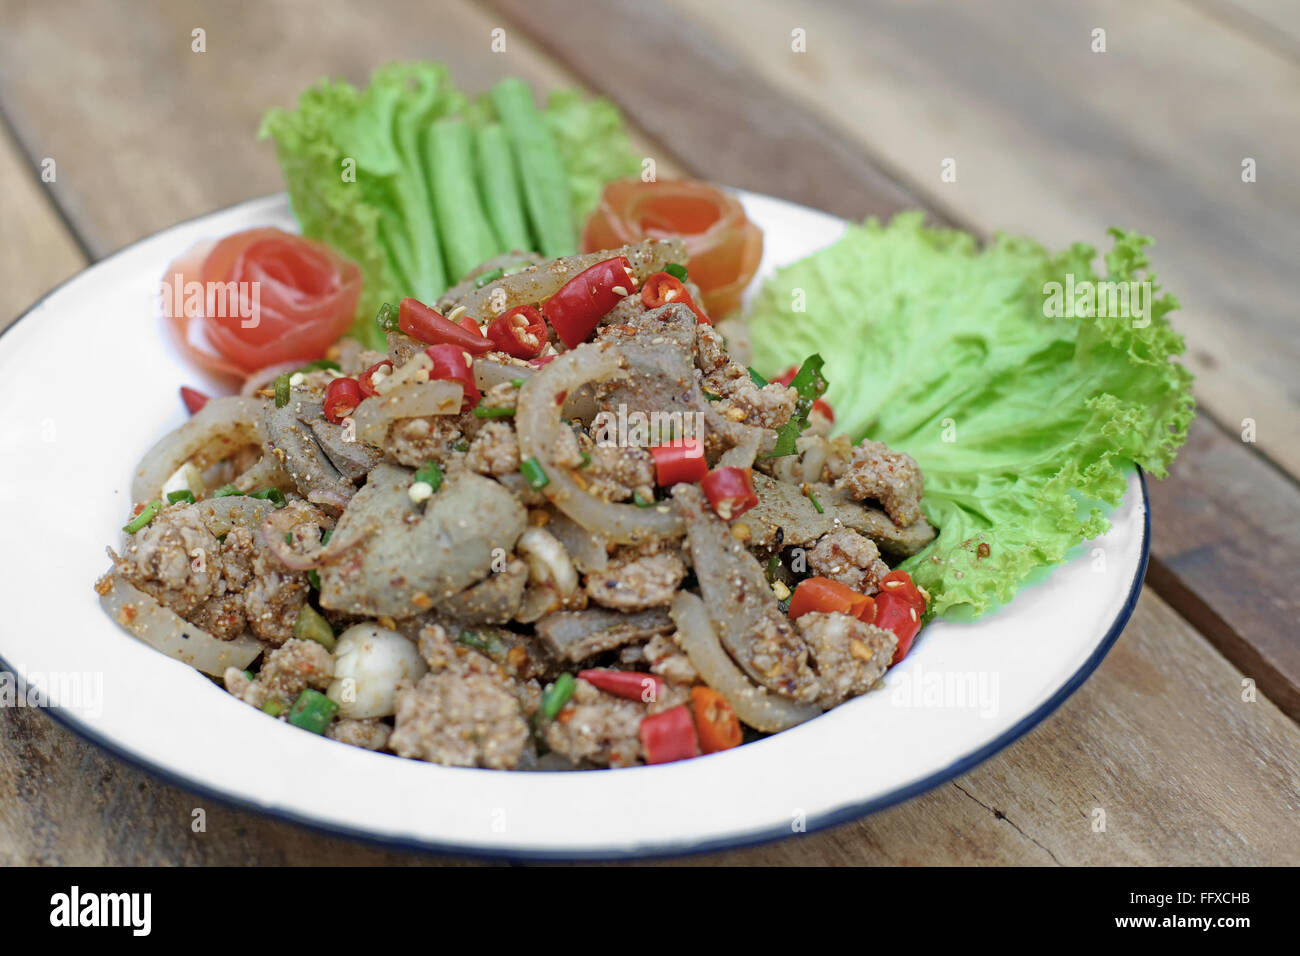 famous thai food, sliced grilled pork spicy salad with vegetable Stock Photo